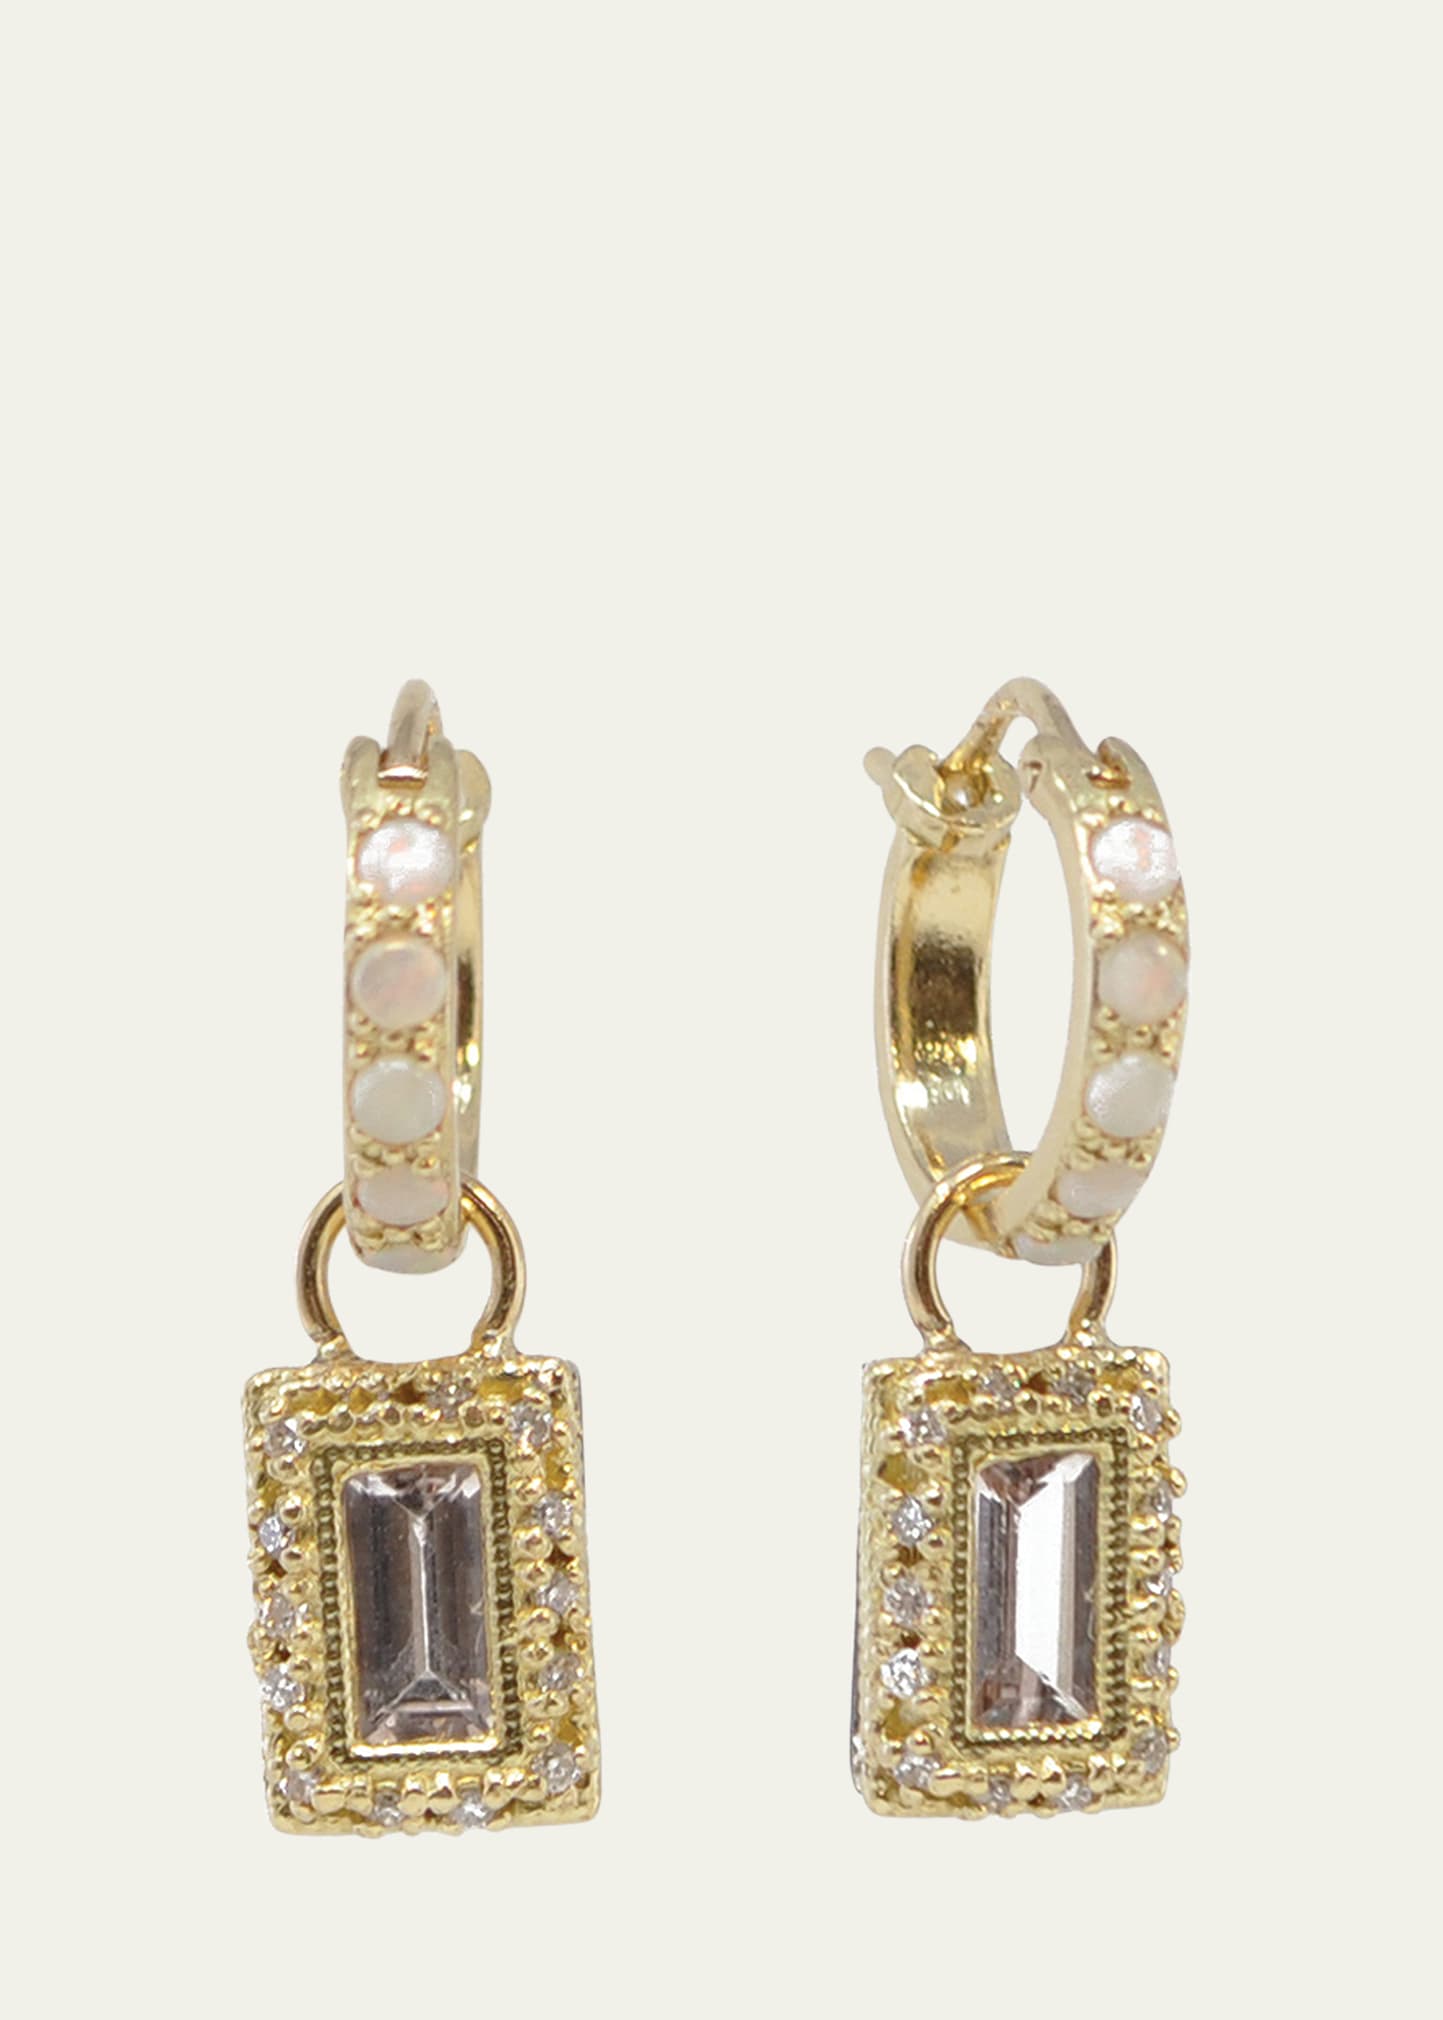 Armenta 18K Yellow Gold and Grey Sterling Silver Huggie Earrings with White Opals, White Diamonds and Morganite Baguettes